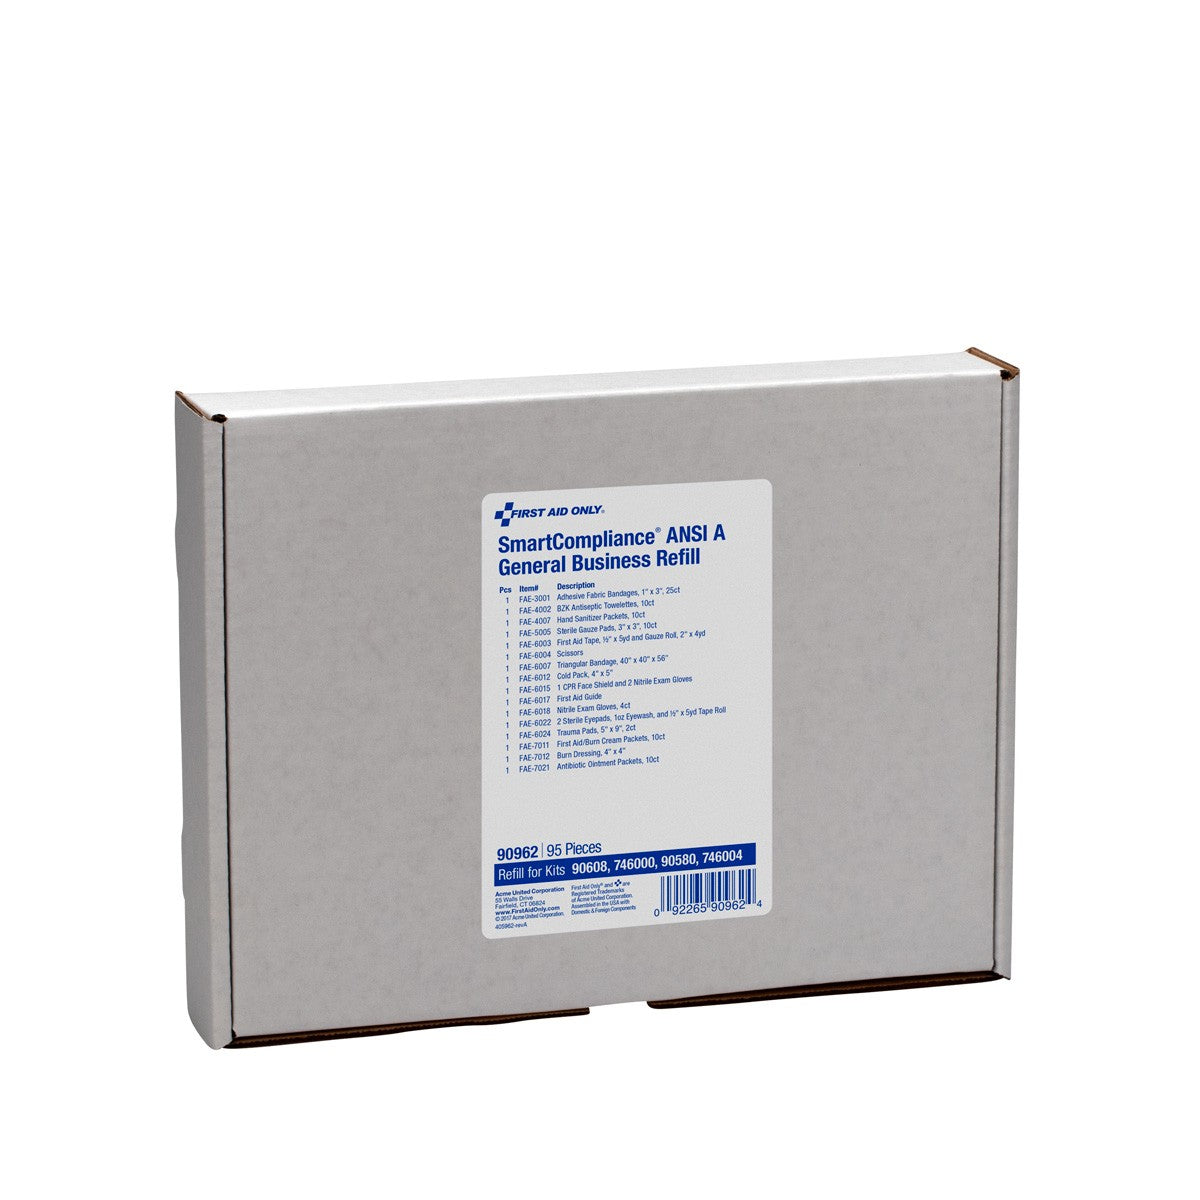 SmartCompliance ANSI A General Business Refill - W-90962